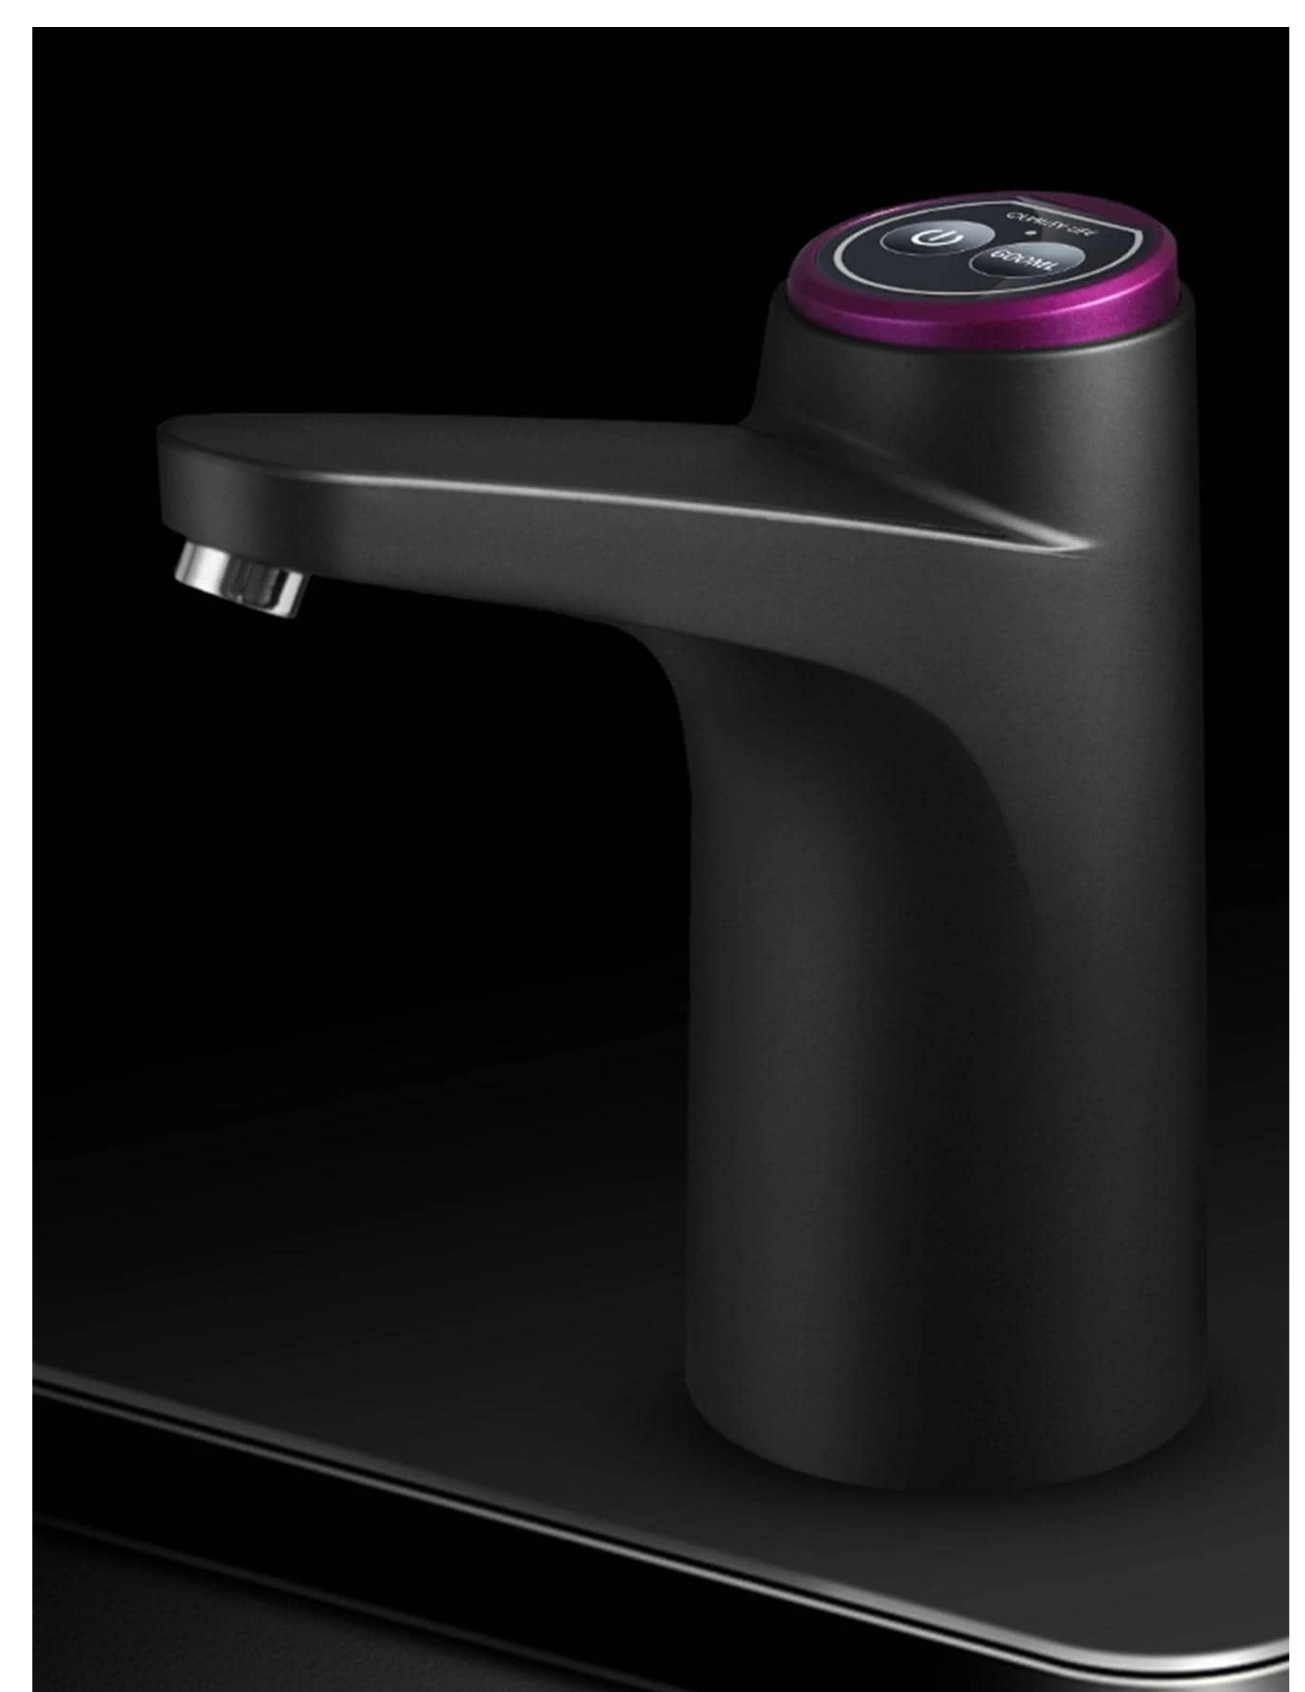 Streamlined Hydration: Introducing the 1pc ABS Water Pump – Your Modern Home Water Dispenser!